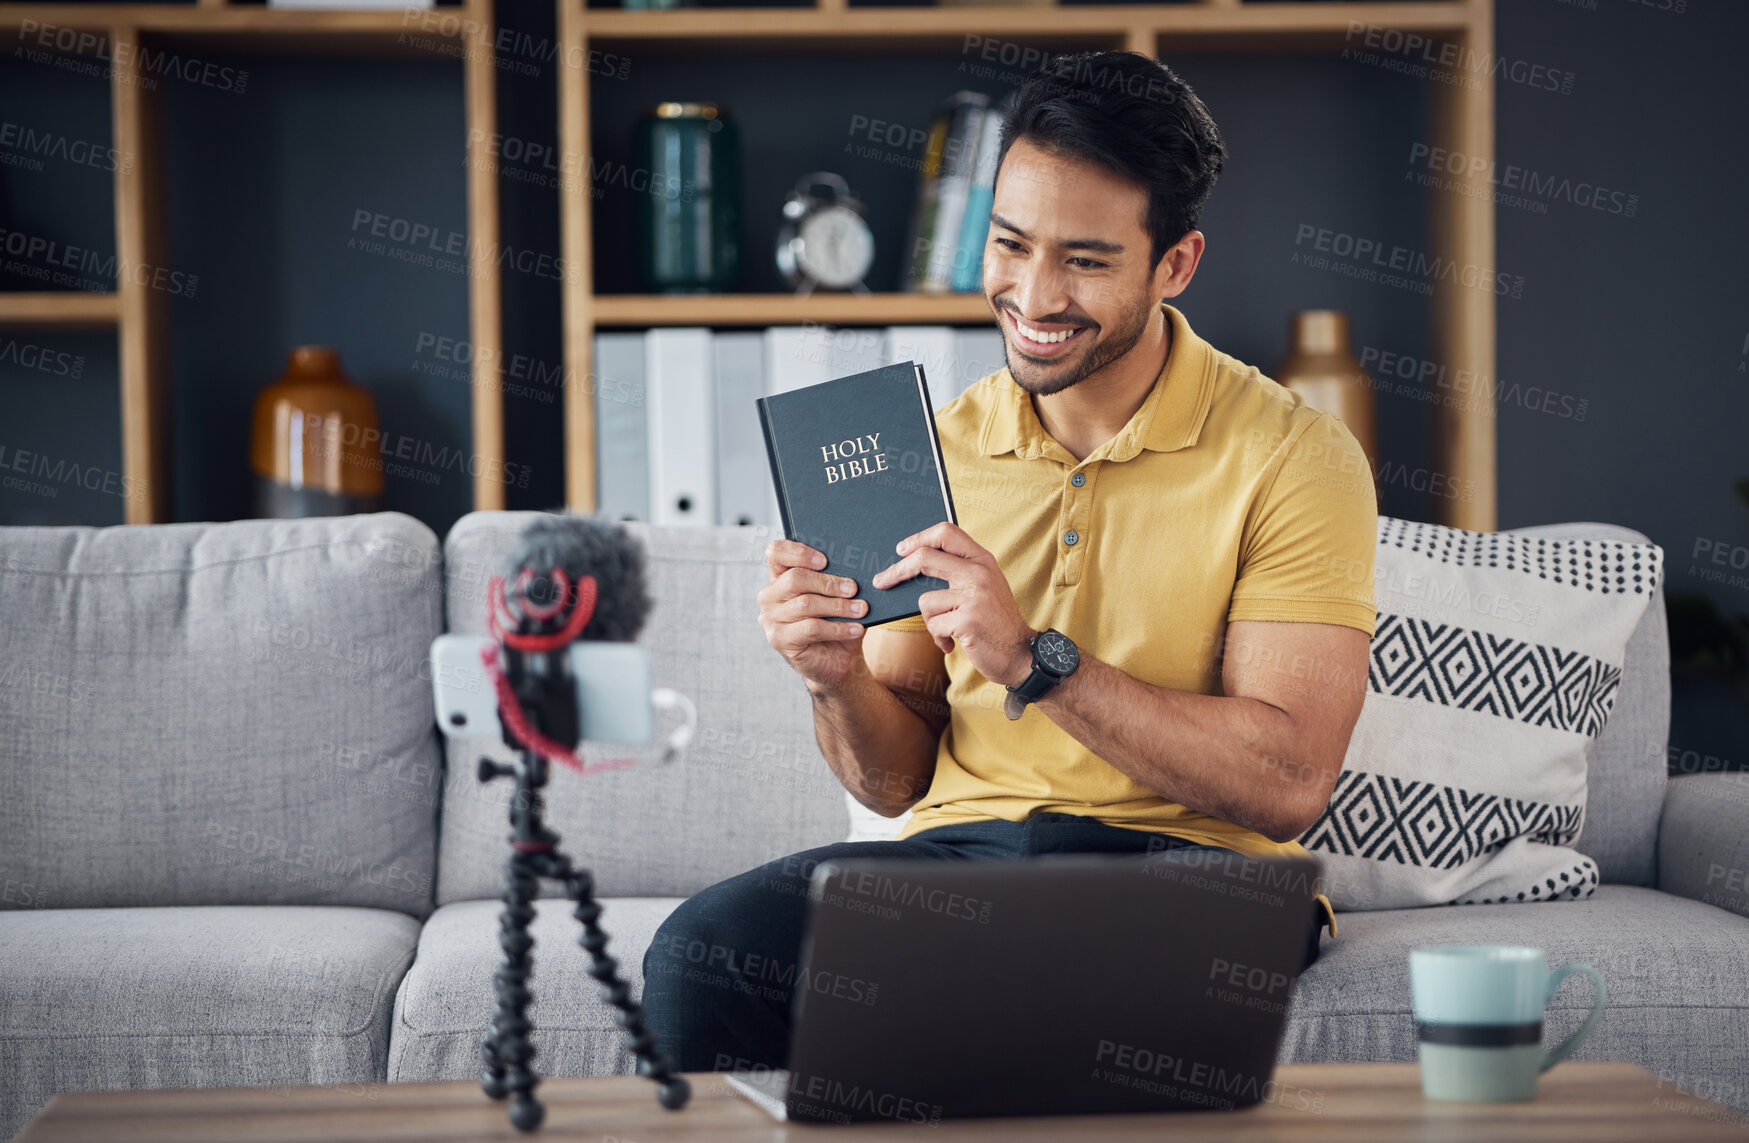 Buy stock photo Bible, smile and man study with phone and microphone online live streaming. Asian male on home sofa with Christian religion book as blog or podcast content creator or influencer teaching or studying 